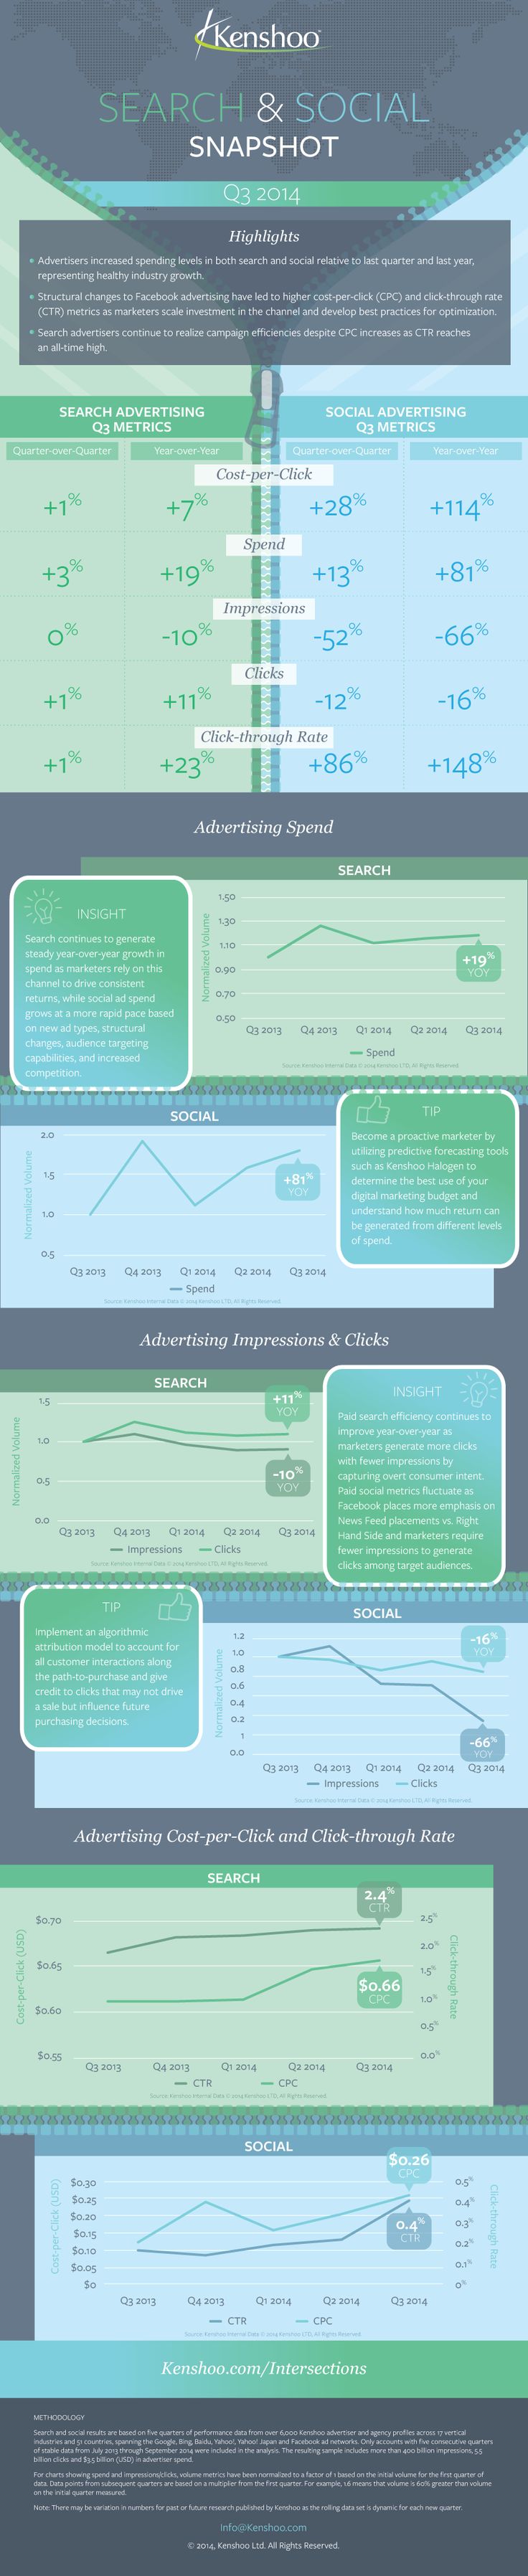 Advertising-Infographics-Facebook-ad-spend-up-81-while-click-through-rates-rise-148 Advertising Infographics : Facebook ad spend up 81% while click through rates rise 148%